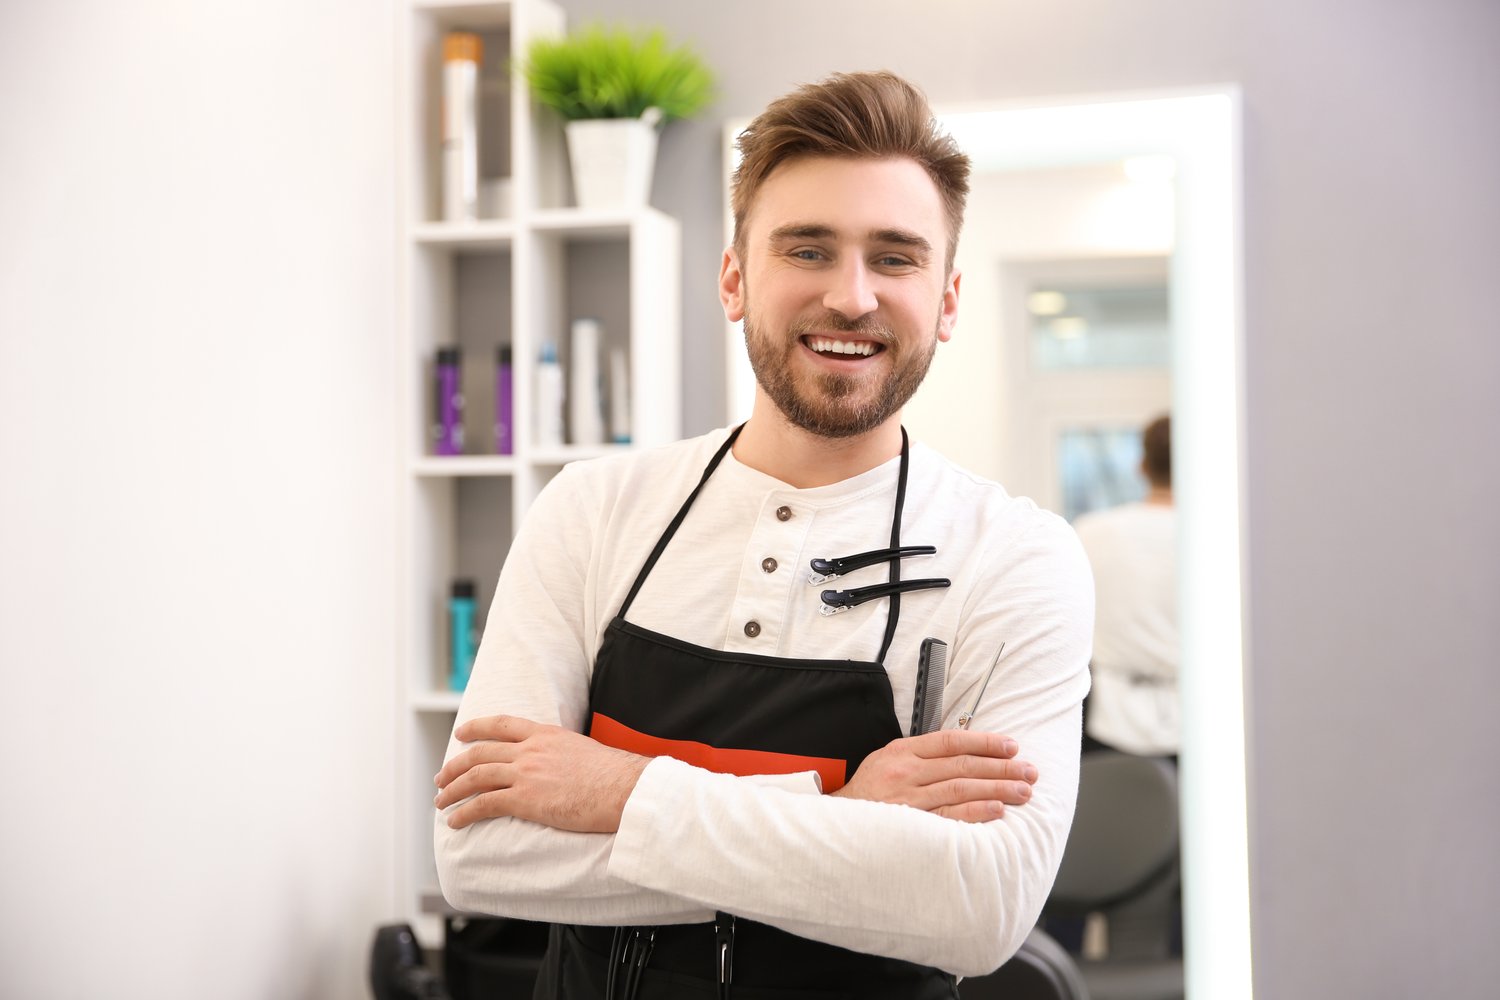 How to promote your barbershop with the stock photos: 4 easy tips